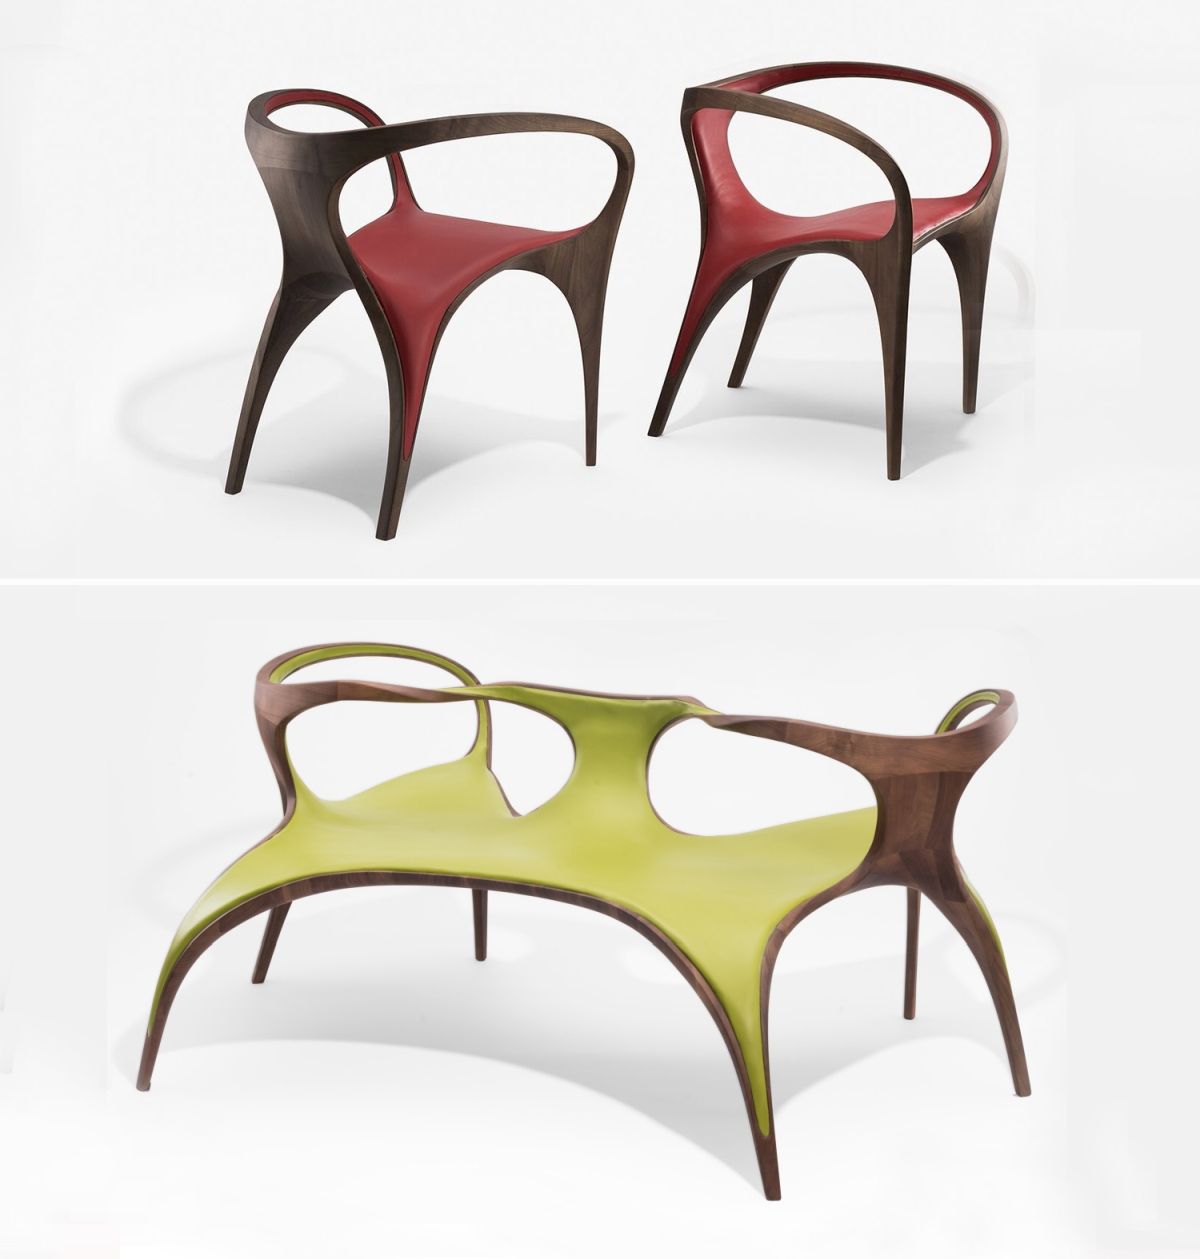 Seating with curvaceous organic lines